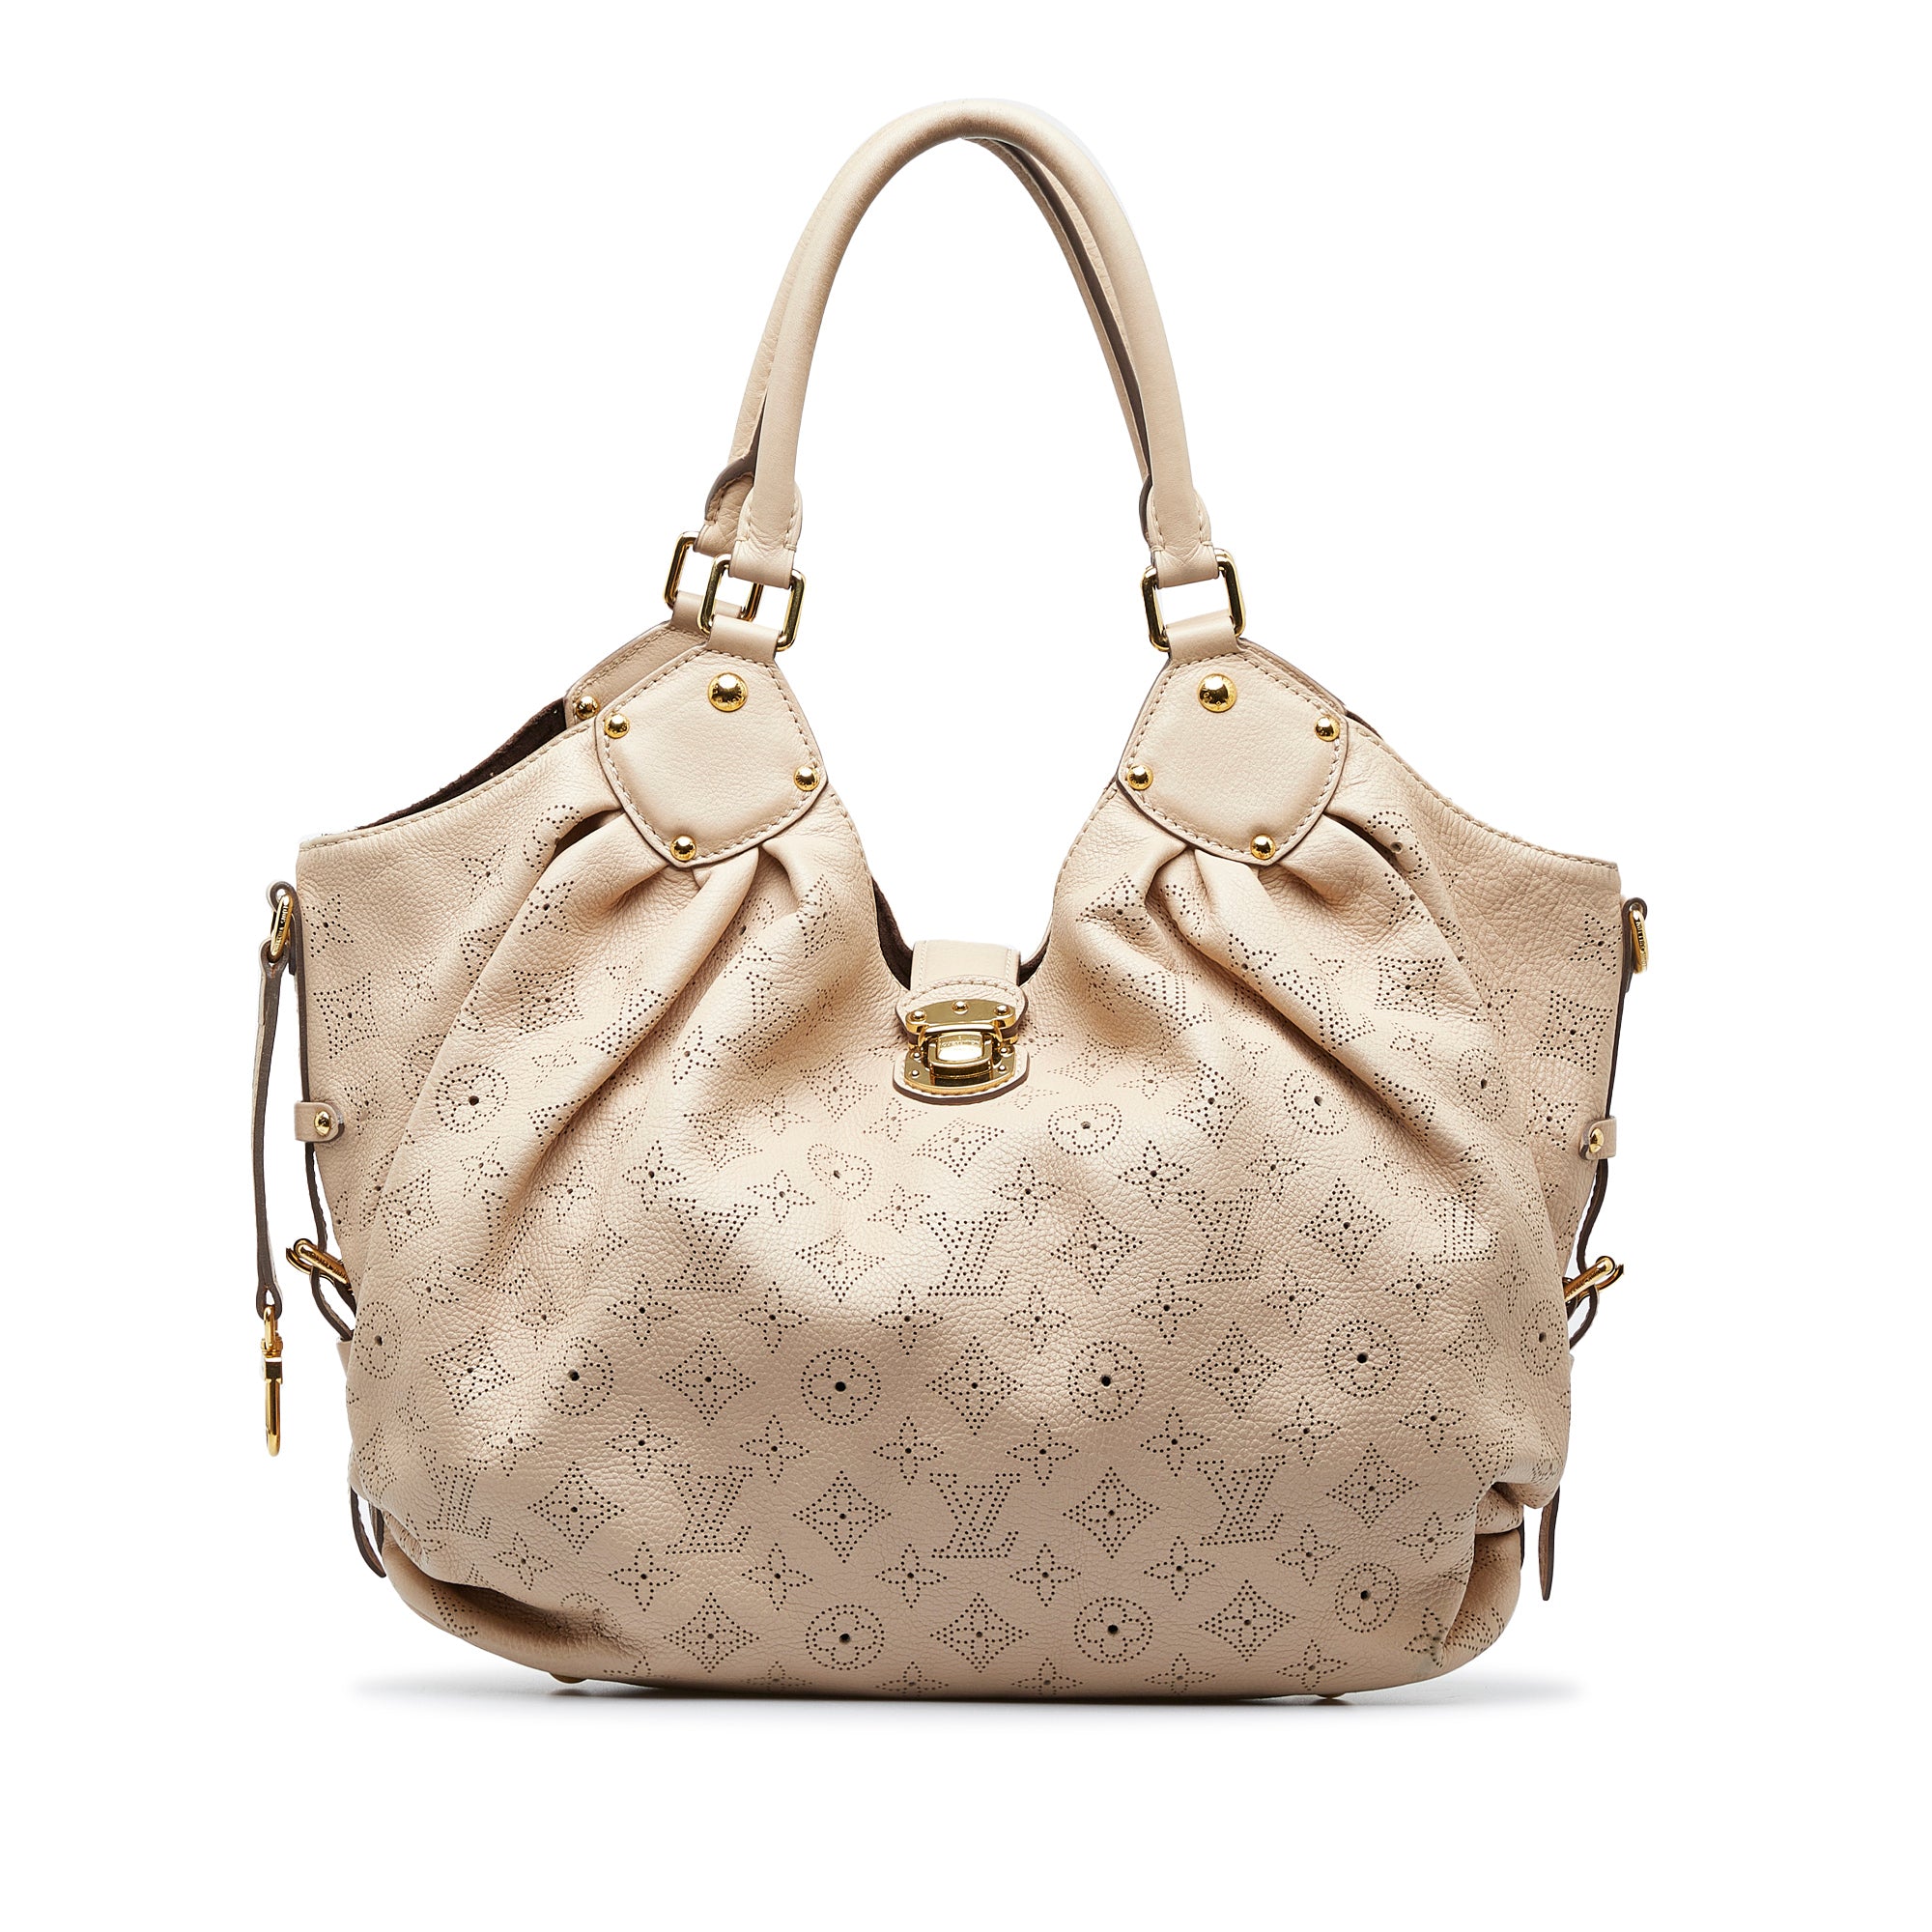 Louis Vuitton - Authenticated Mahina Handbag - Leather Beige for Women, Good Condition